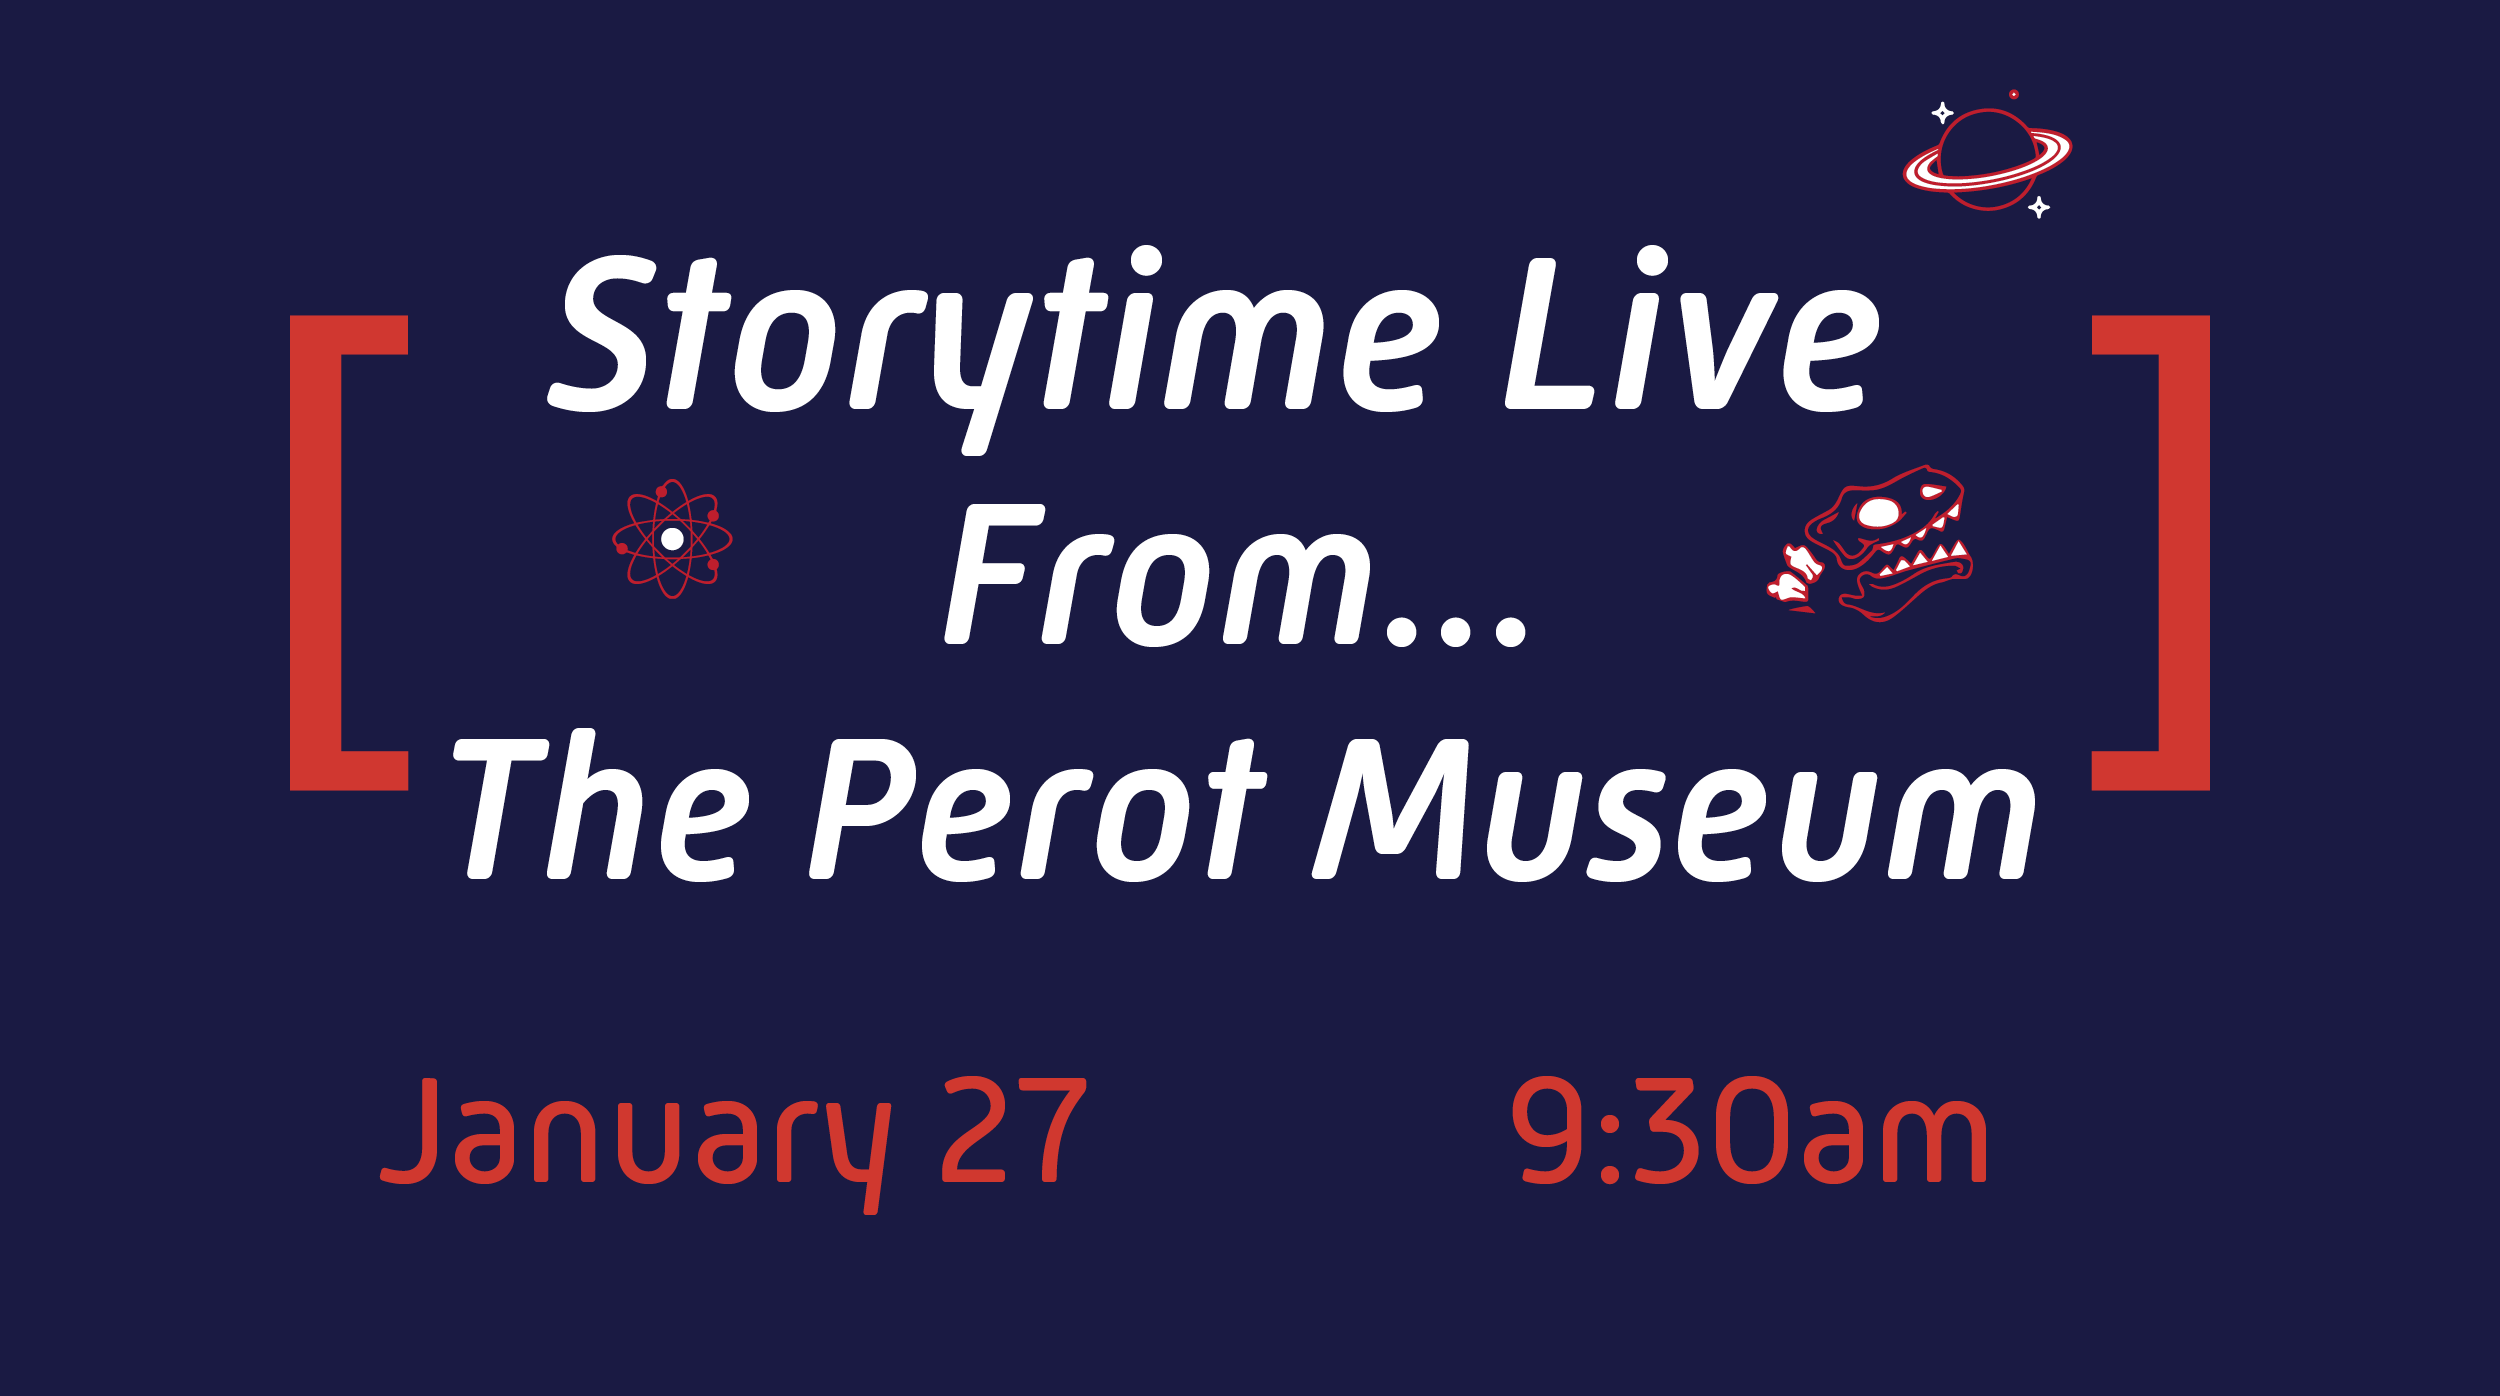 Text Read "Storytime Live From... The Perot Museum", illustration of a dinosaur skull.